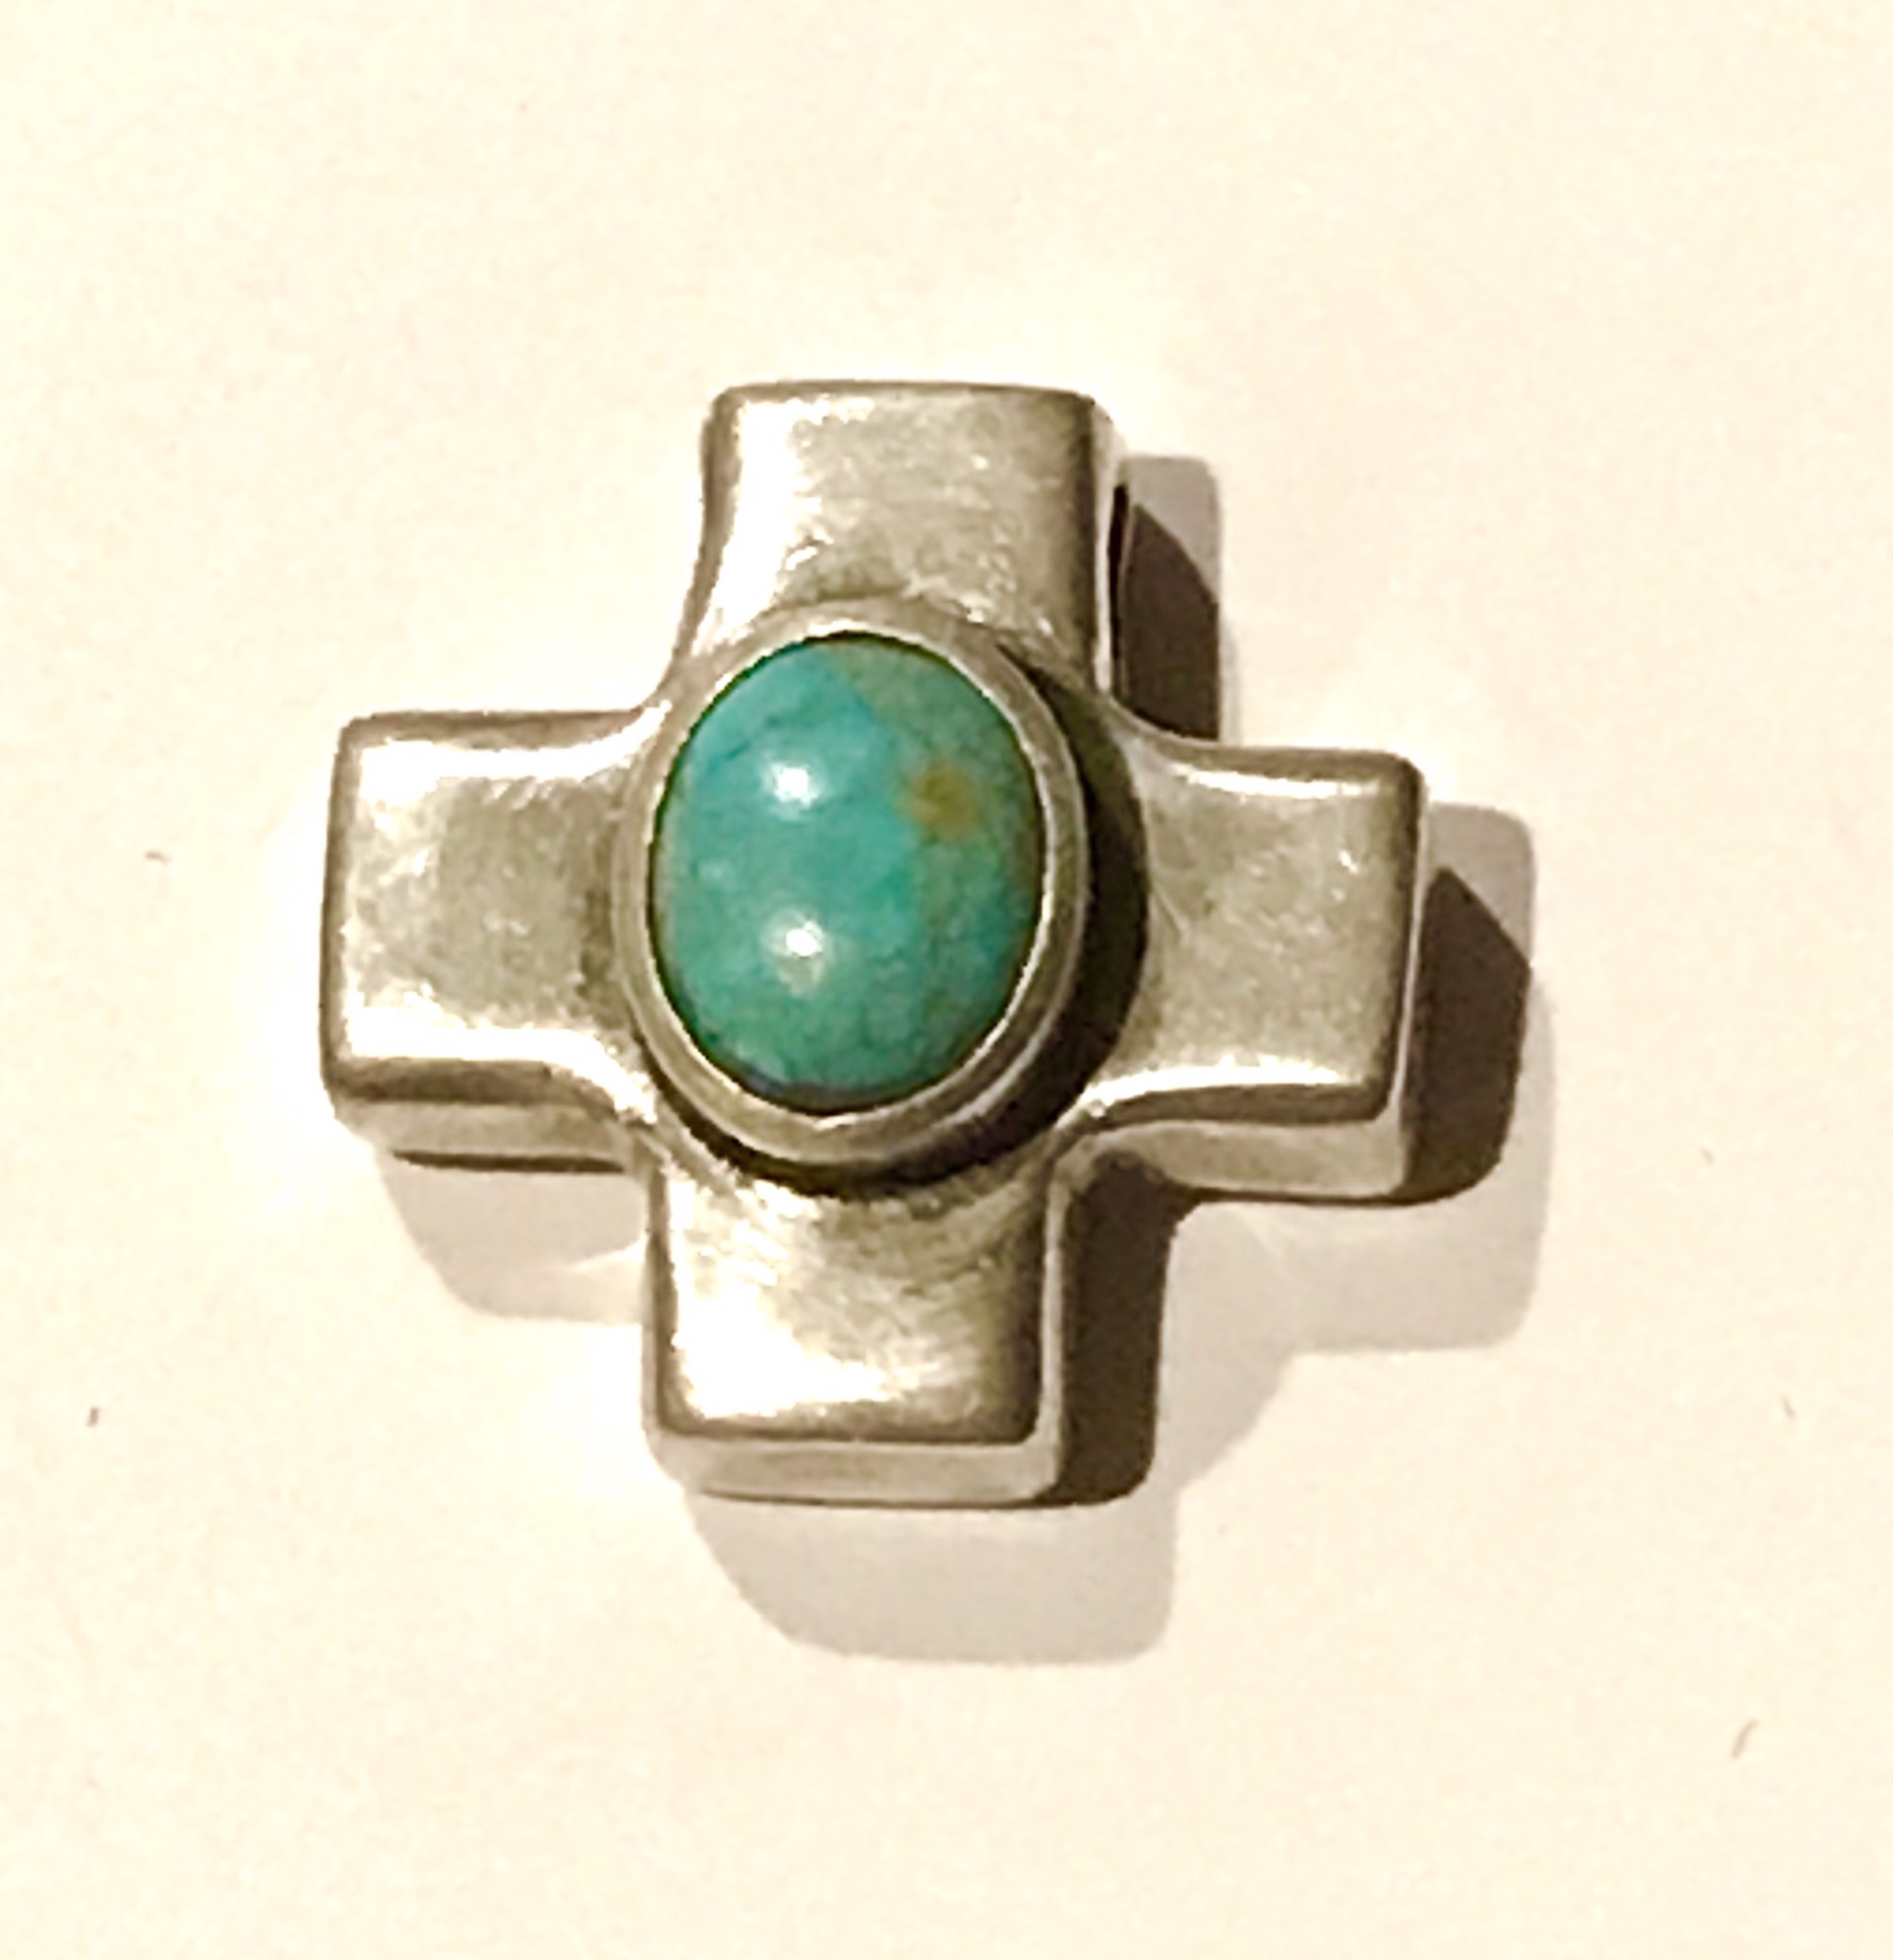 Pendant - Brushed Sterling Silver Cross with Turquoise Oval by Dan Dodson